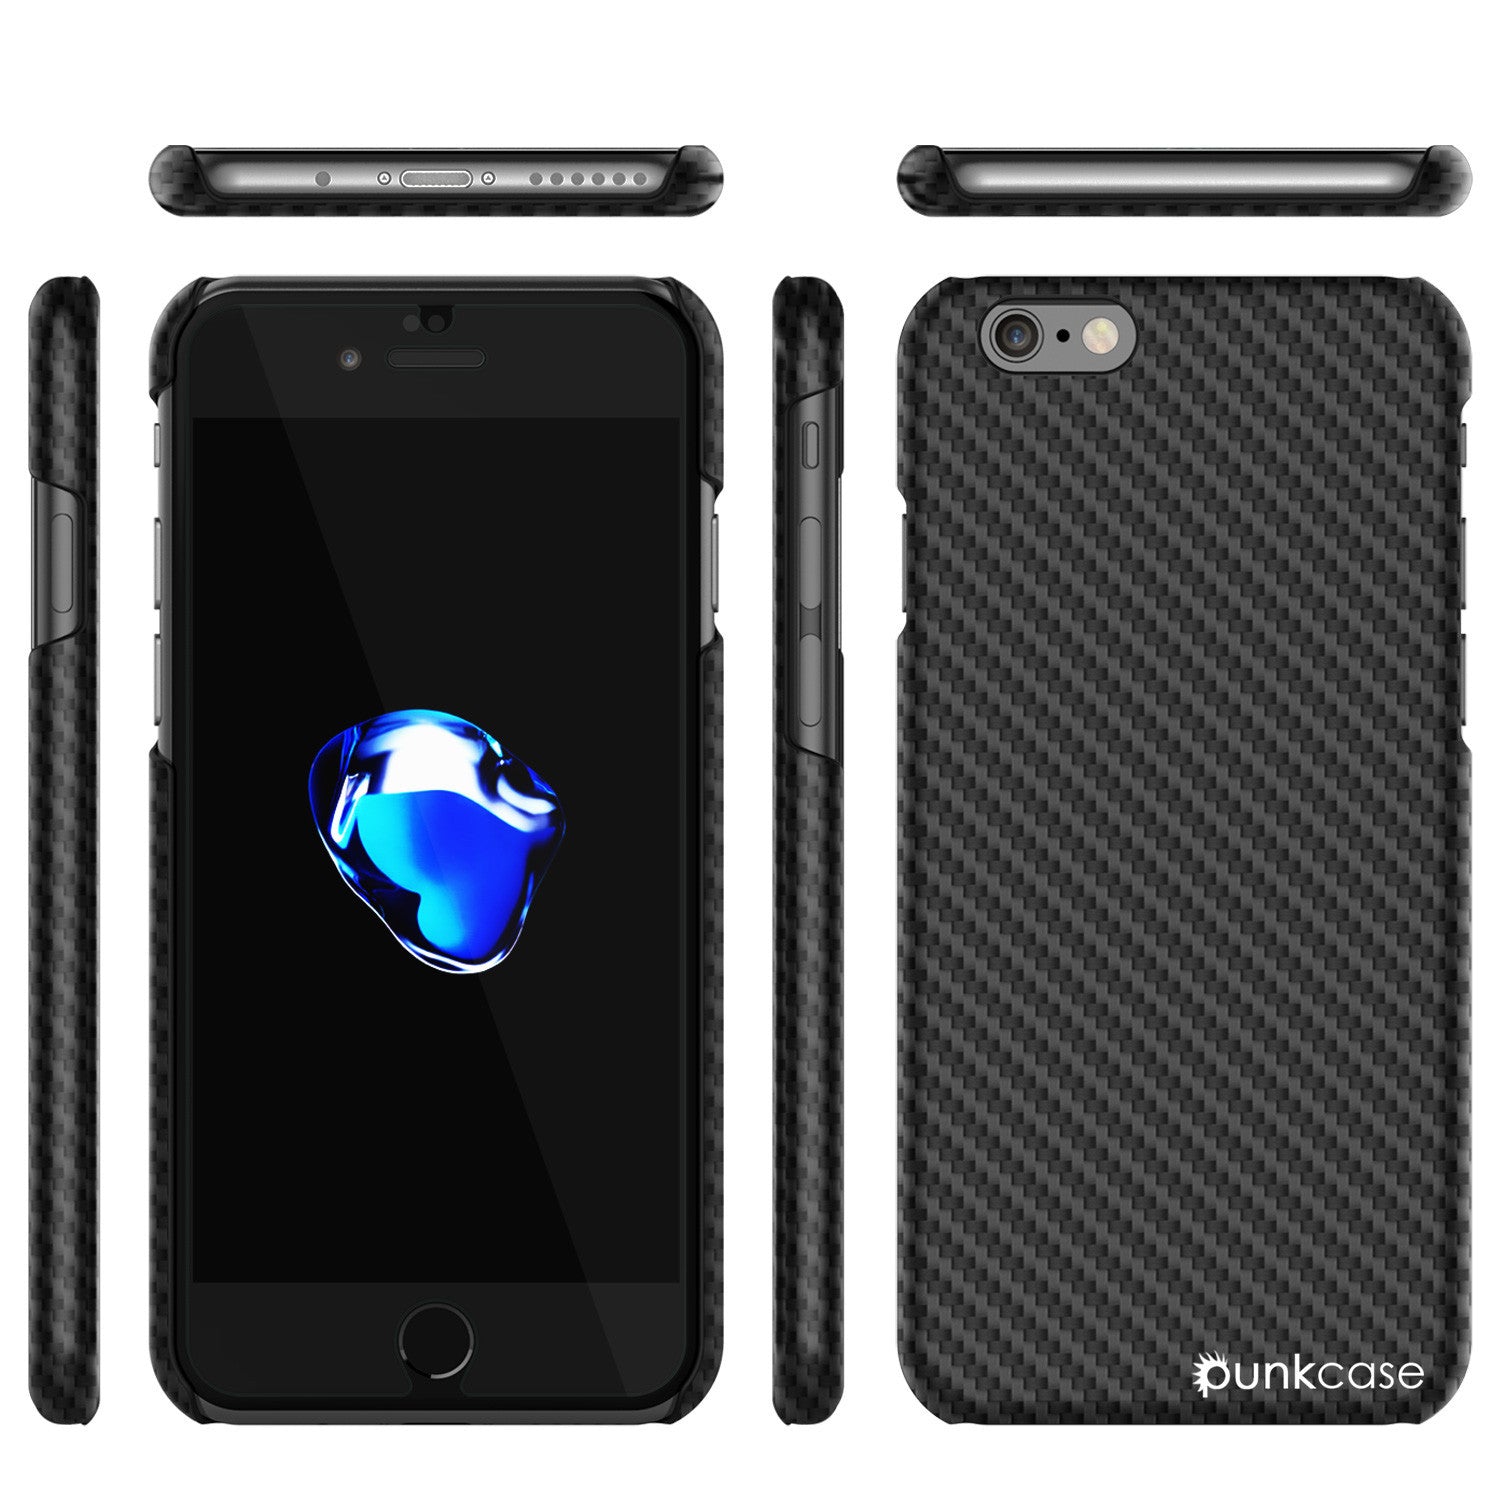 iPhone 7 Case, Punkcase CarbonShield Jet Black with 0.3mm Tempered Glass